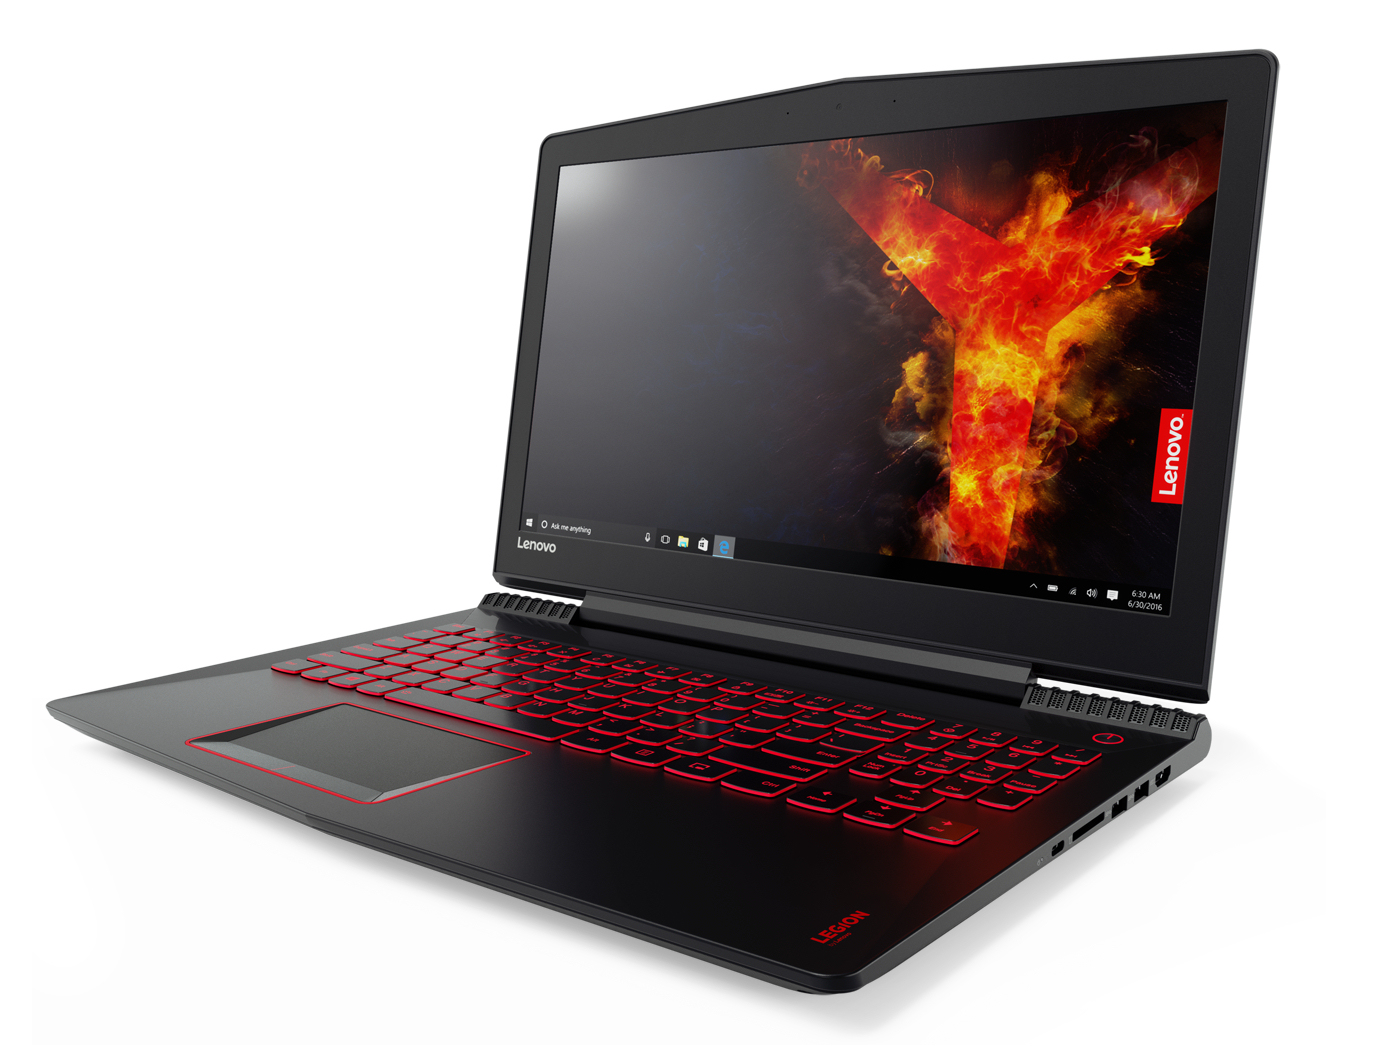 orchestra Manufacturing component Lenovo Legion Y520-15IKBN (7300HQ, GTX 1050 Ti, FHD) Laptop Review -  NotebookCheck.net Reviews